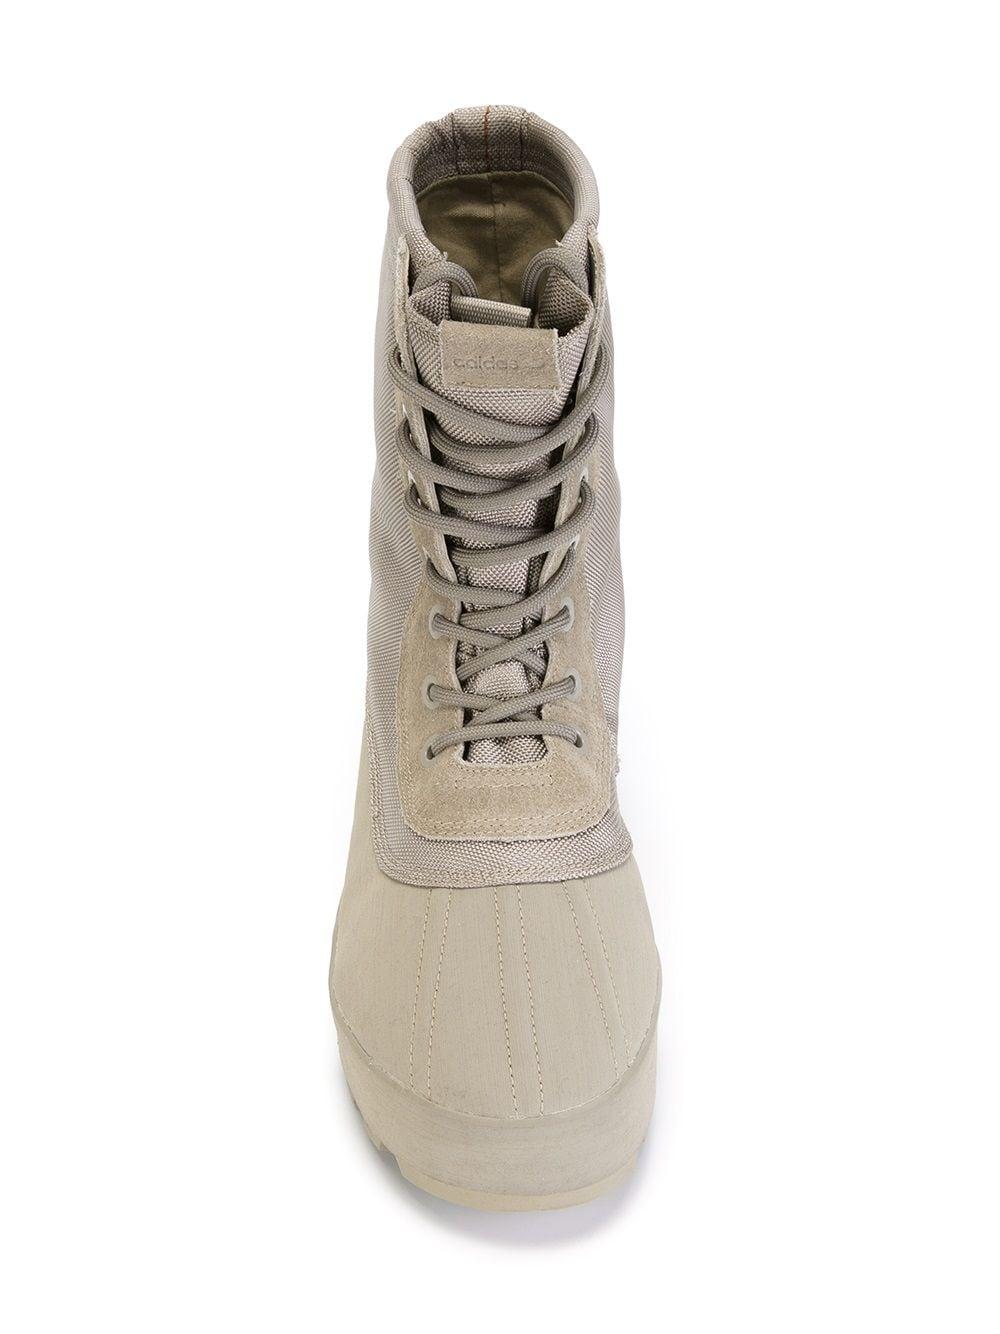 Yeezy Rubber Adidas Originals By Kanye West '950' Boots for Men | Lyst